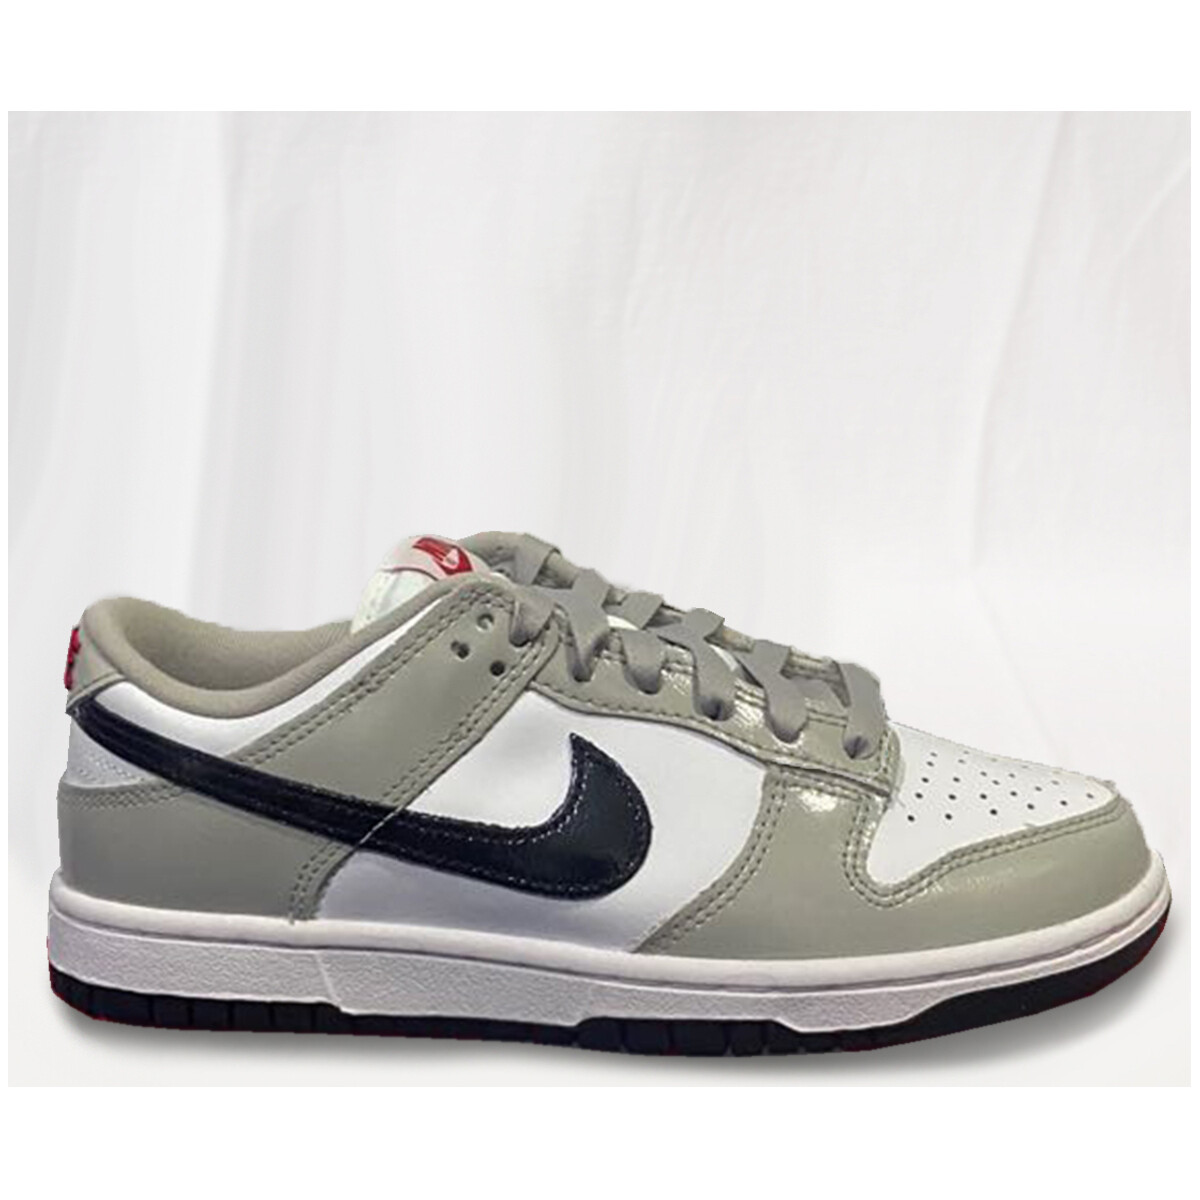 Nike Gris Nike Dunk Low ESS Light Iron Ore - DQ7576-001 - Taille : 37.5 FR Ui2ygvbH